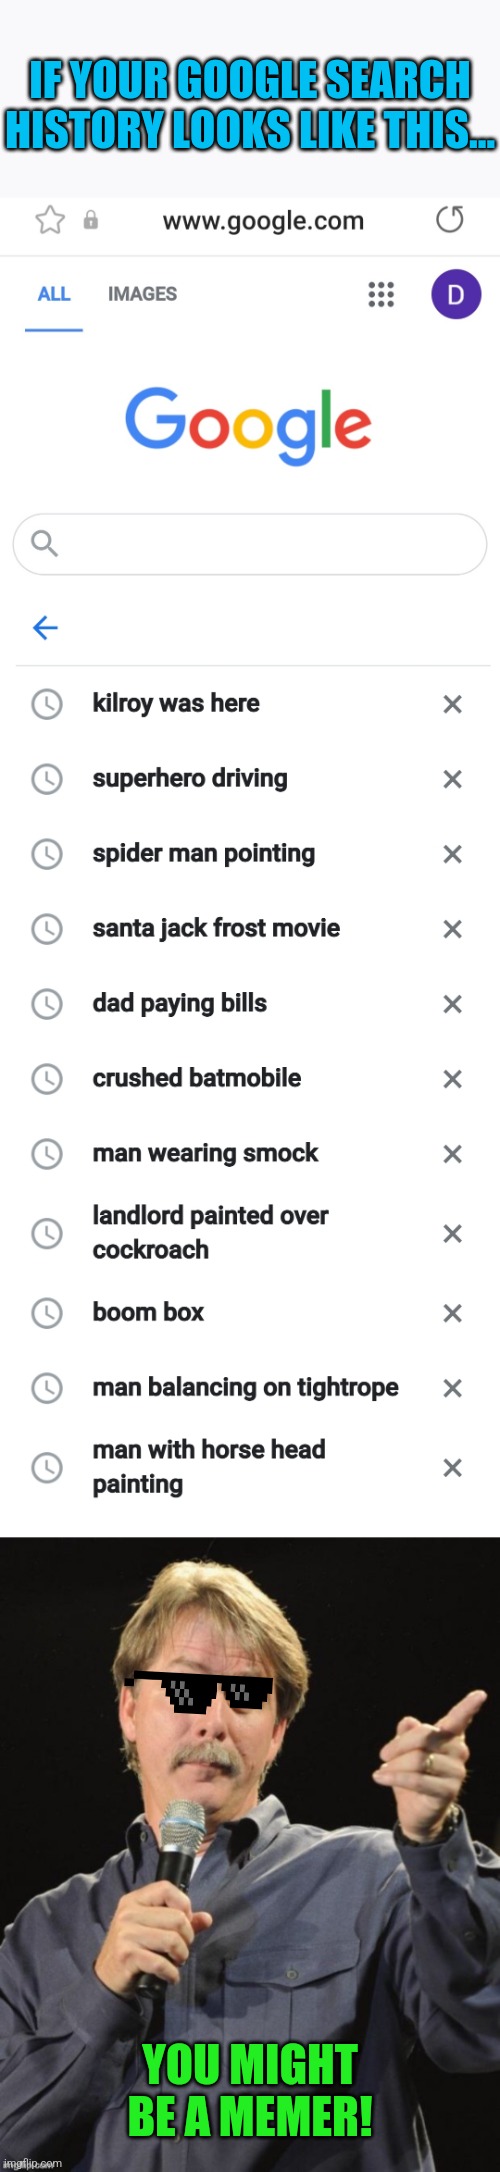 Jeff Memeworthy 2 | IF YOUR GOOGLE SEARCH HISTORY LOOKS LIKE THIS... YOU MIGHT BE A MEMER! | image tagged in jeff foxworthy you might be a redneck if,google,search history,memers | made w/ Imgflip meme maker